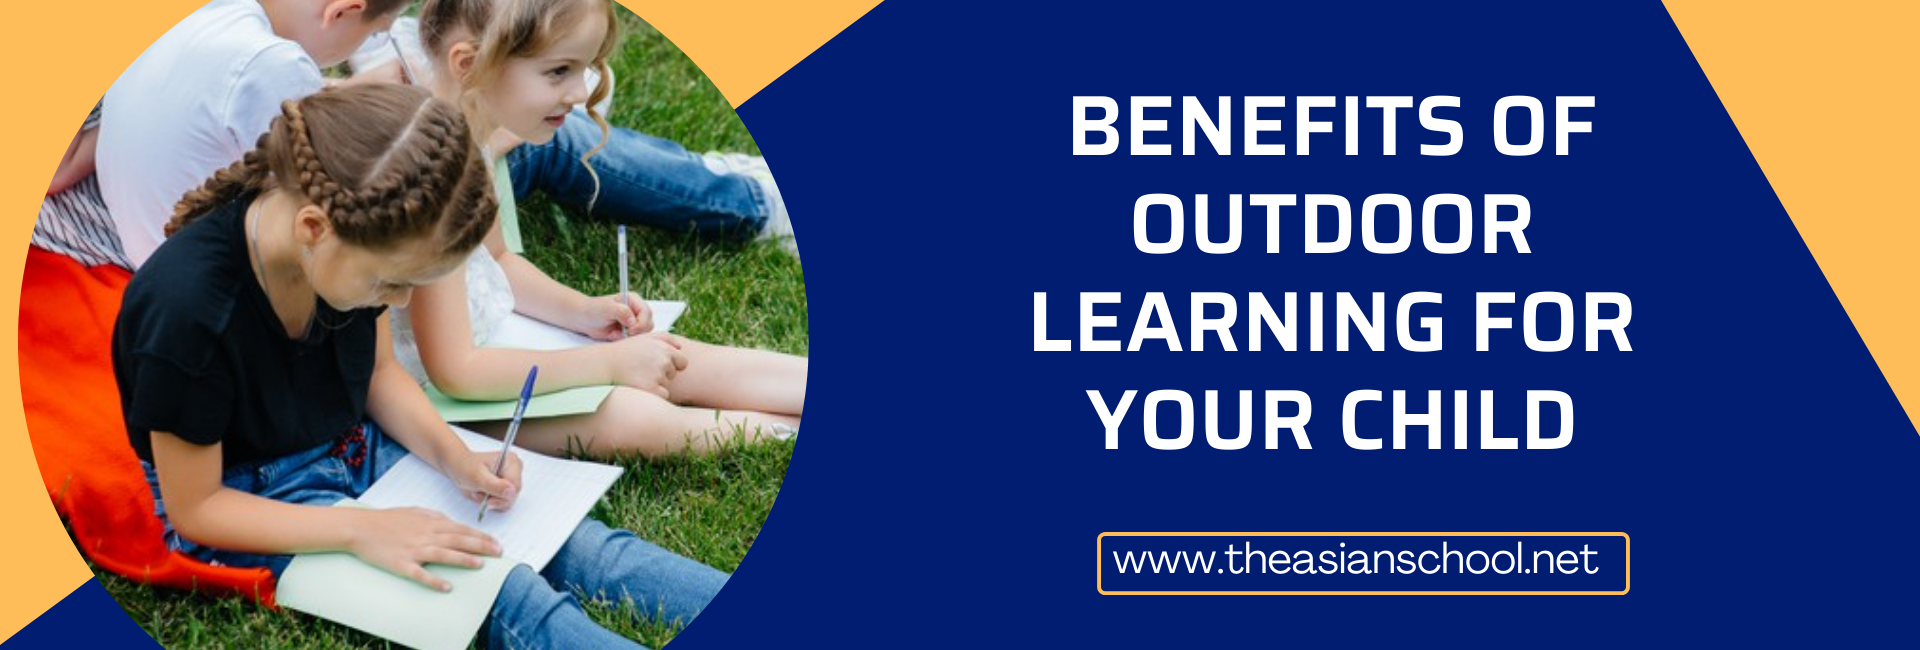 Benefits Of Outdoor Learning For Your Child